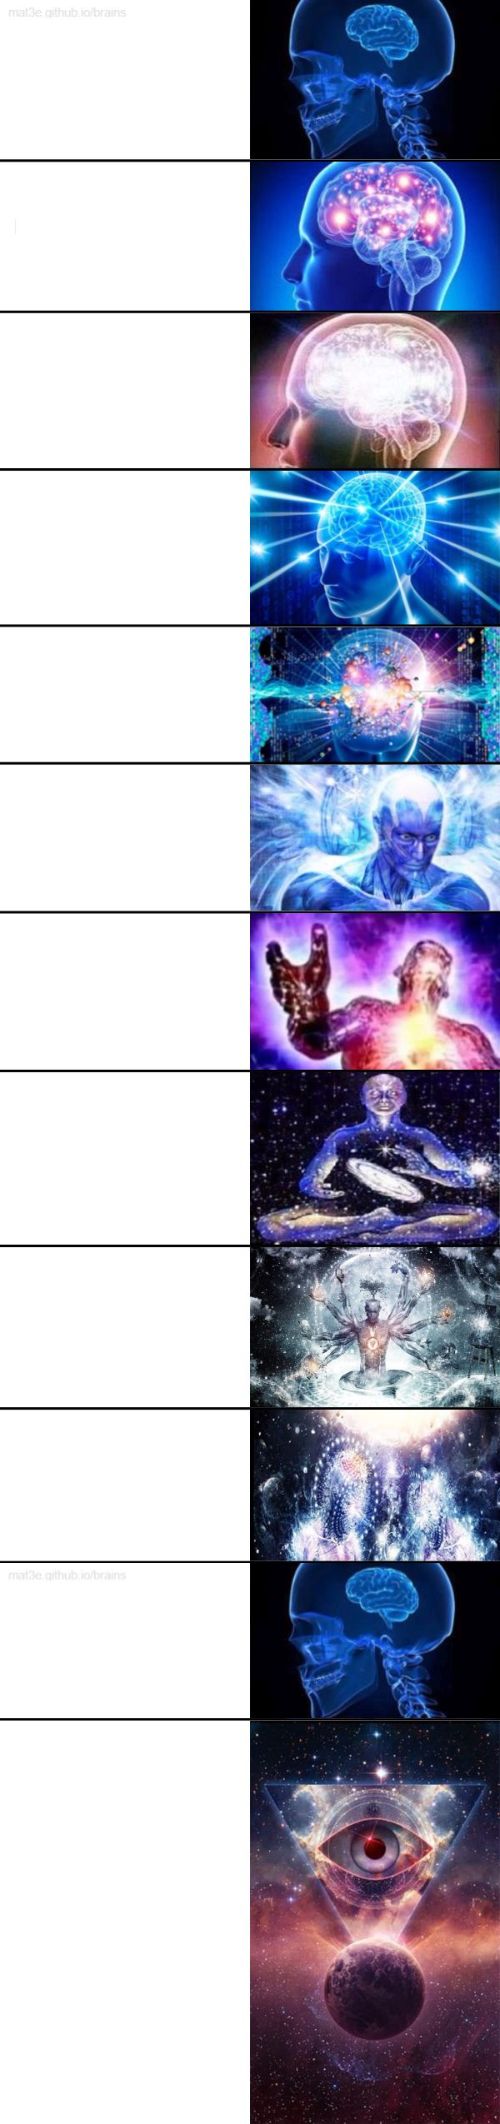 High Quality Expanded Brain 12 part with mental revert Blank Meme Template